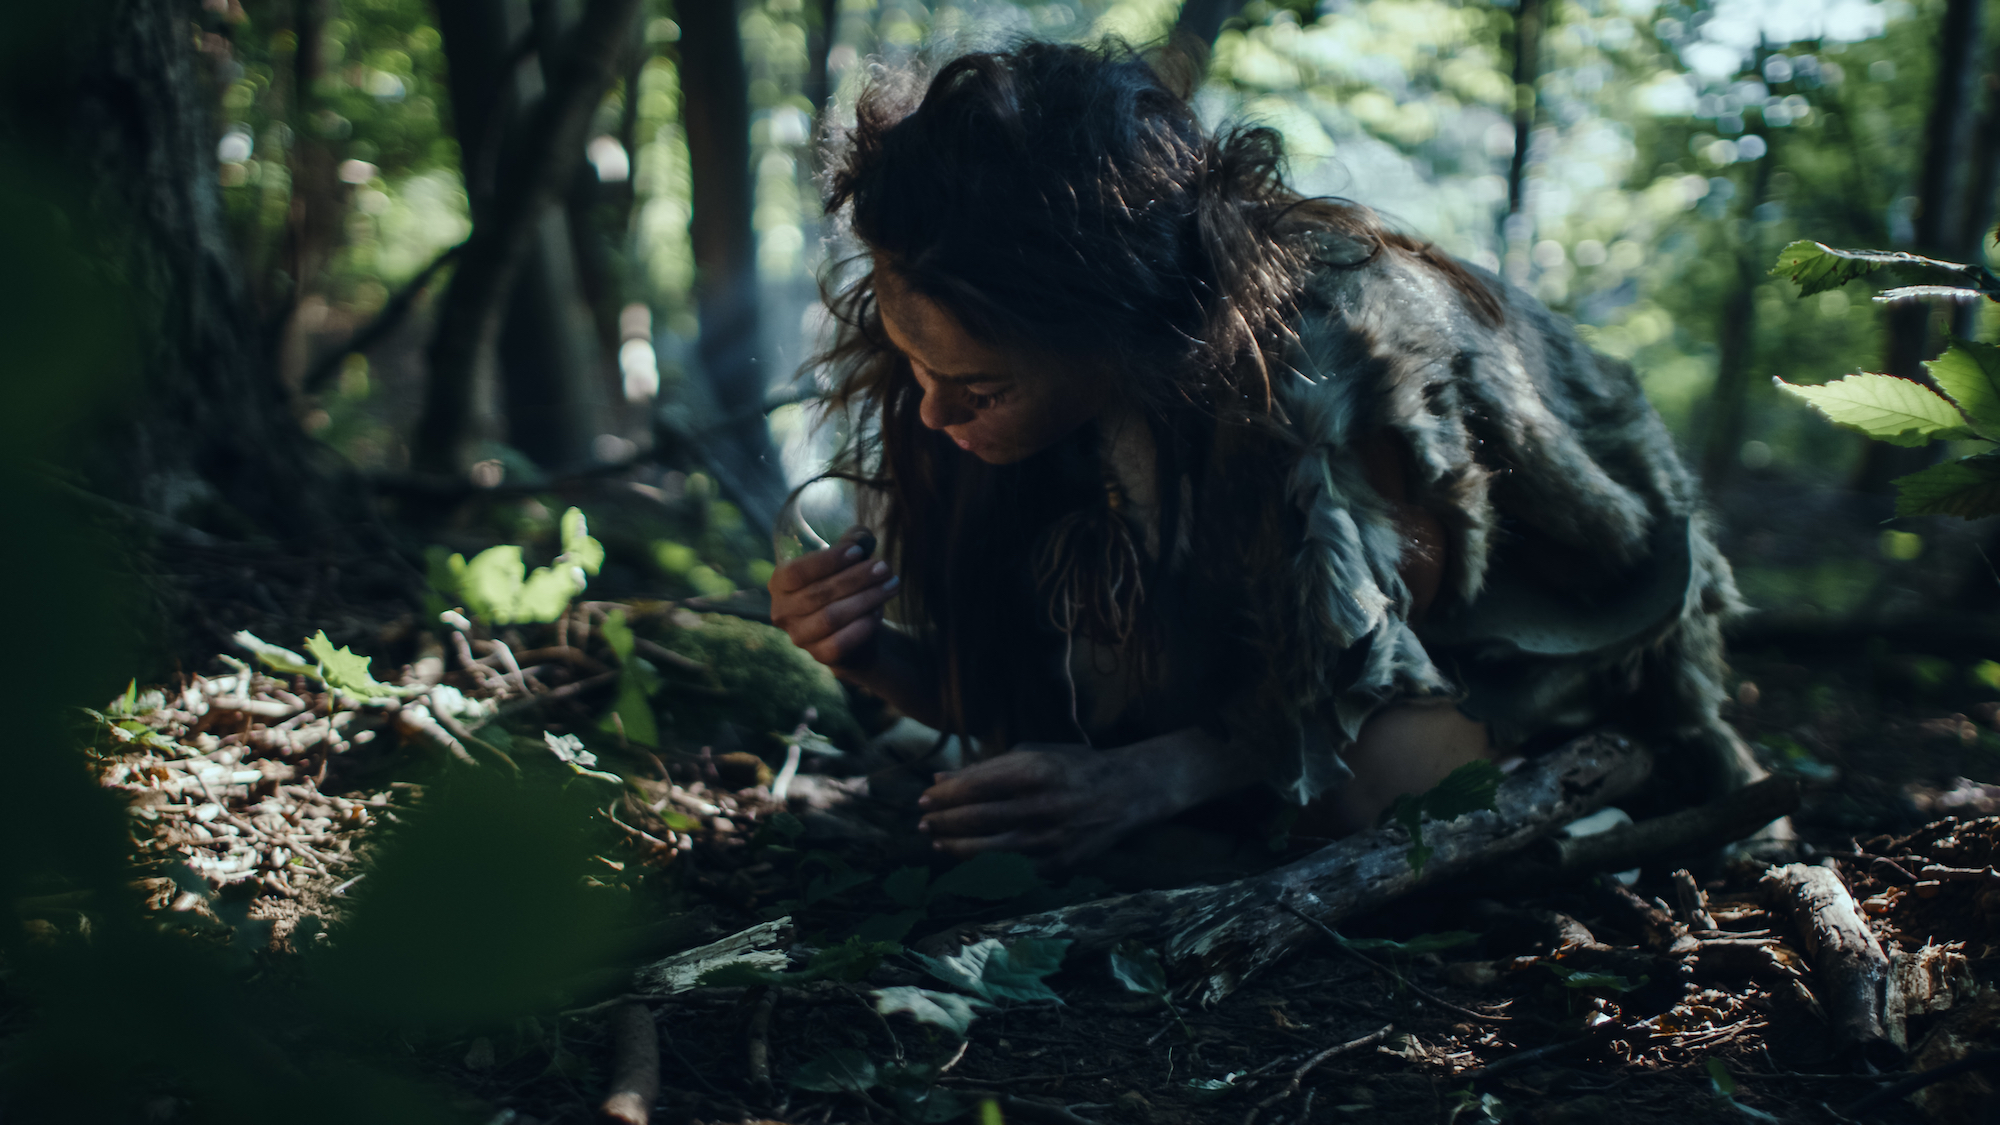 Prehistoric Cave Woman Hunter-Gatherer Searches for Nuts and Berries in the Forest. Primitive Neanderthal Woman Finding Food in the Sunny Forest